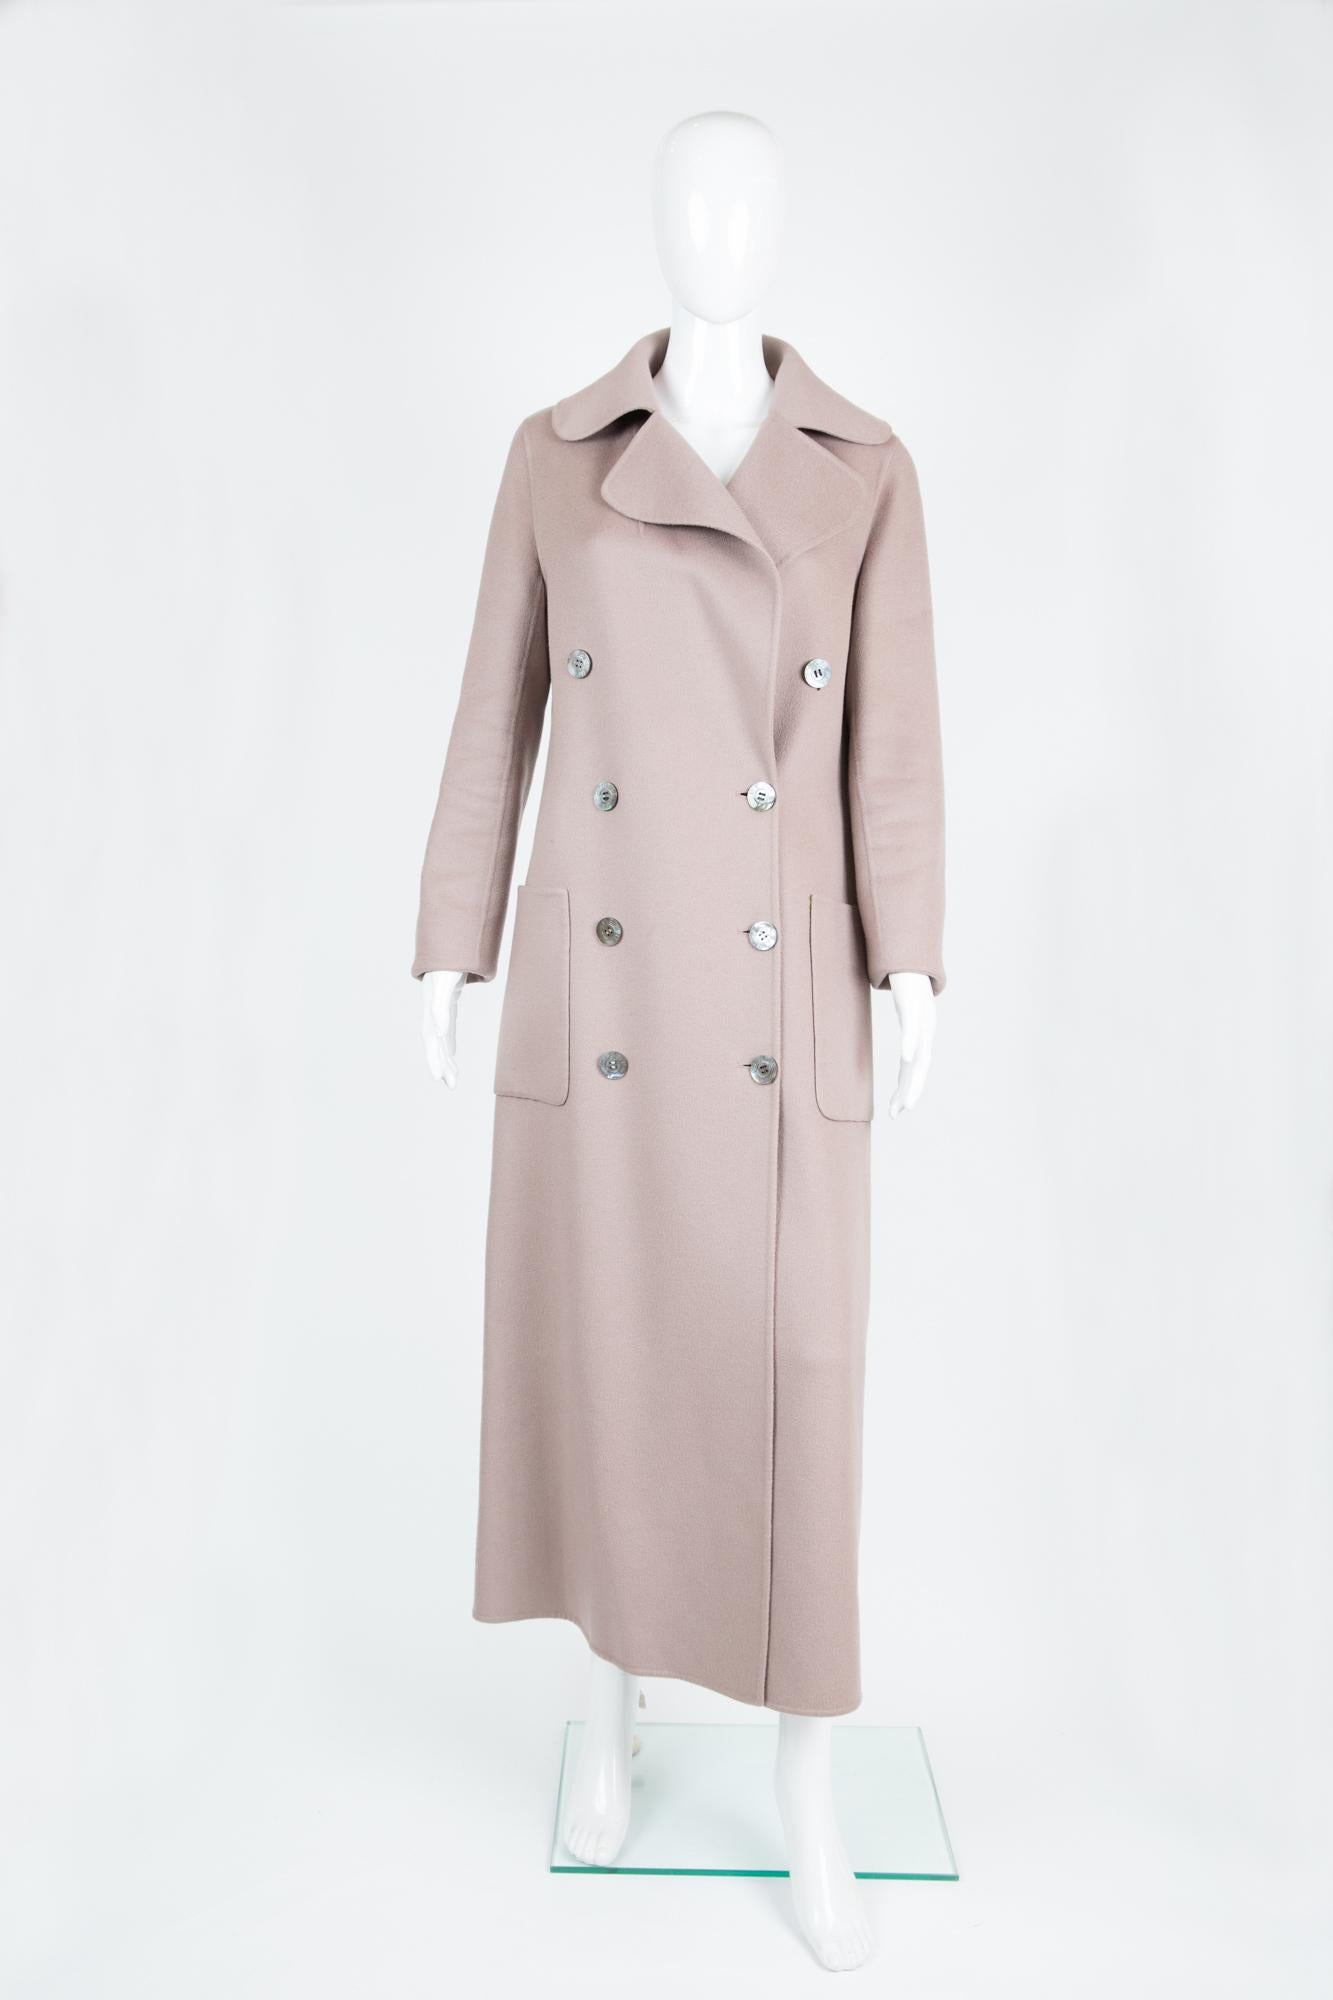 Blush color Celine 100% cashmere long coat featuring a double breasted opening, large pockets, front logo button fastening, a separated belt, very light as it is an unlined coat. 
Estimated size 40fr/US8/UK12
Composition: 100% cashmere, 
In